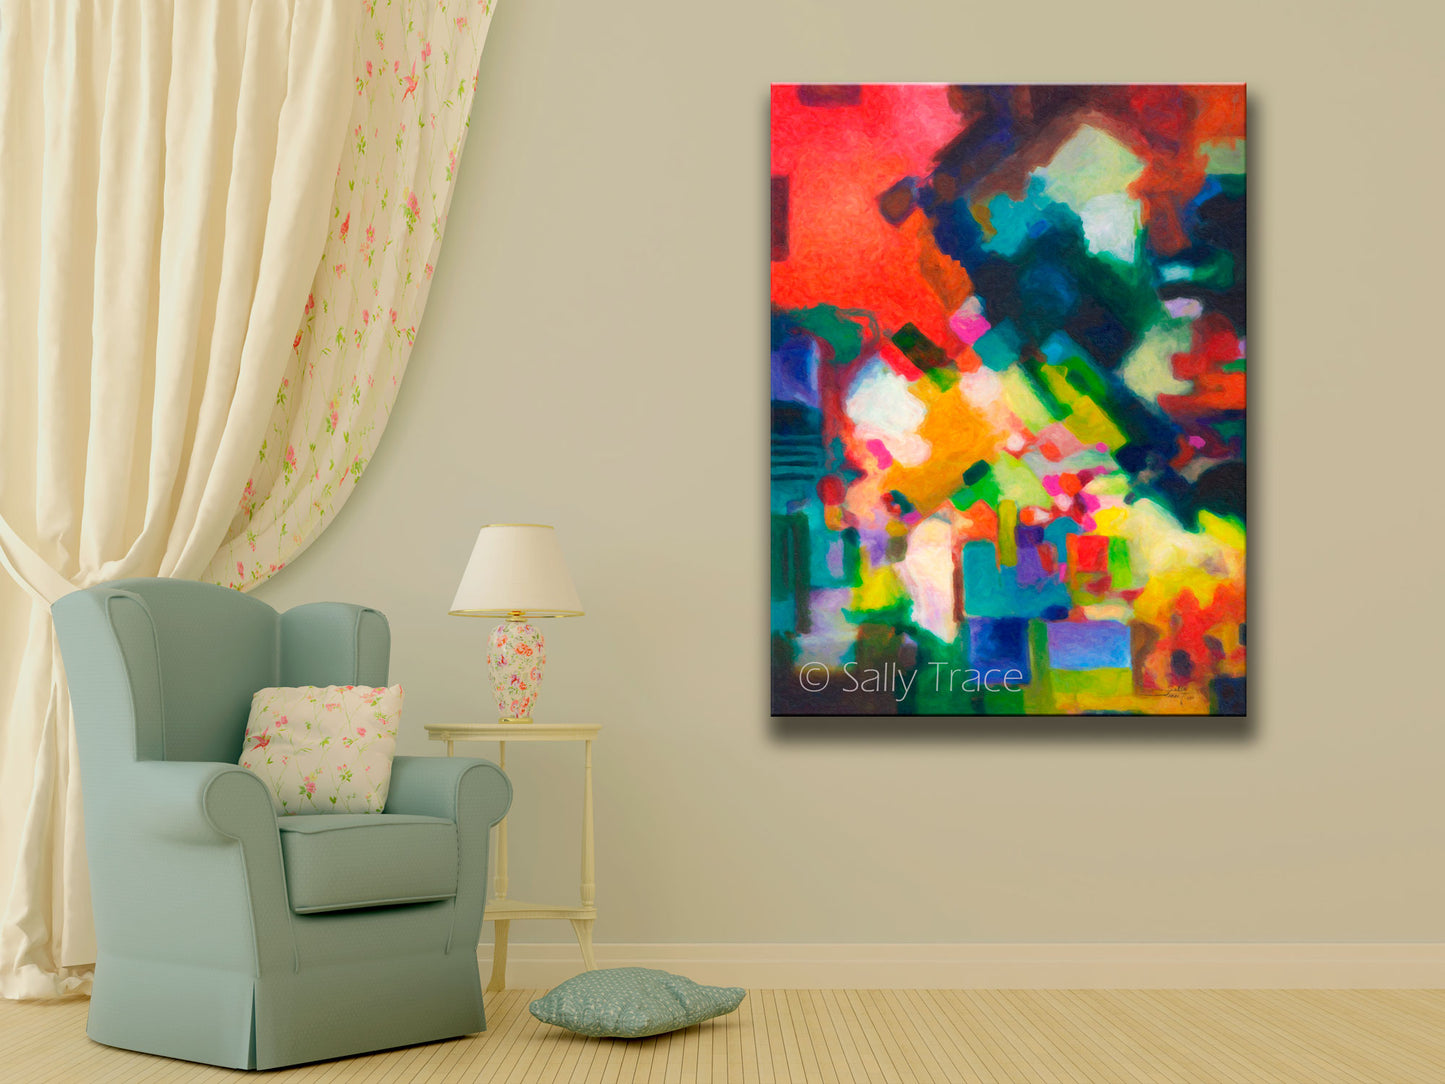 Giclee prints of an abstract Color Field painting by Sally Trace, room view